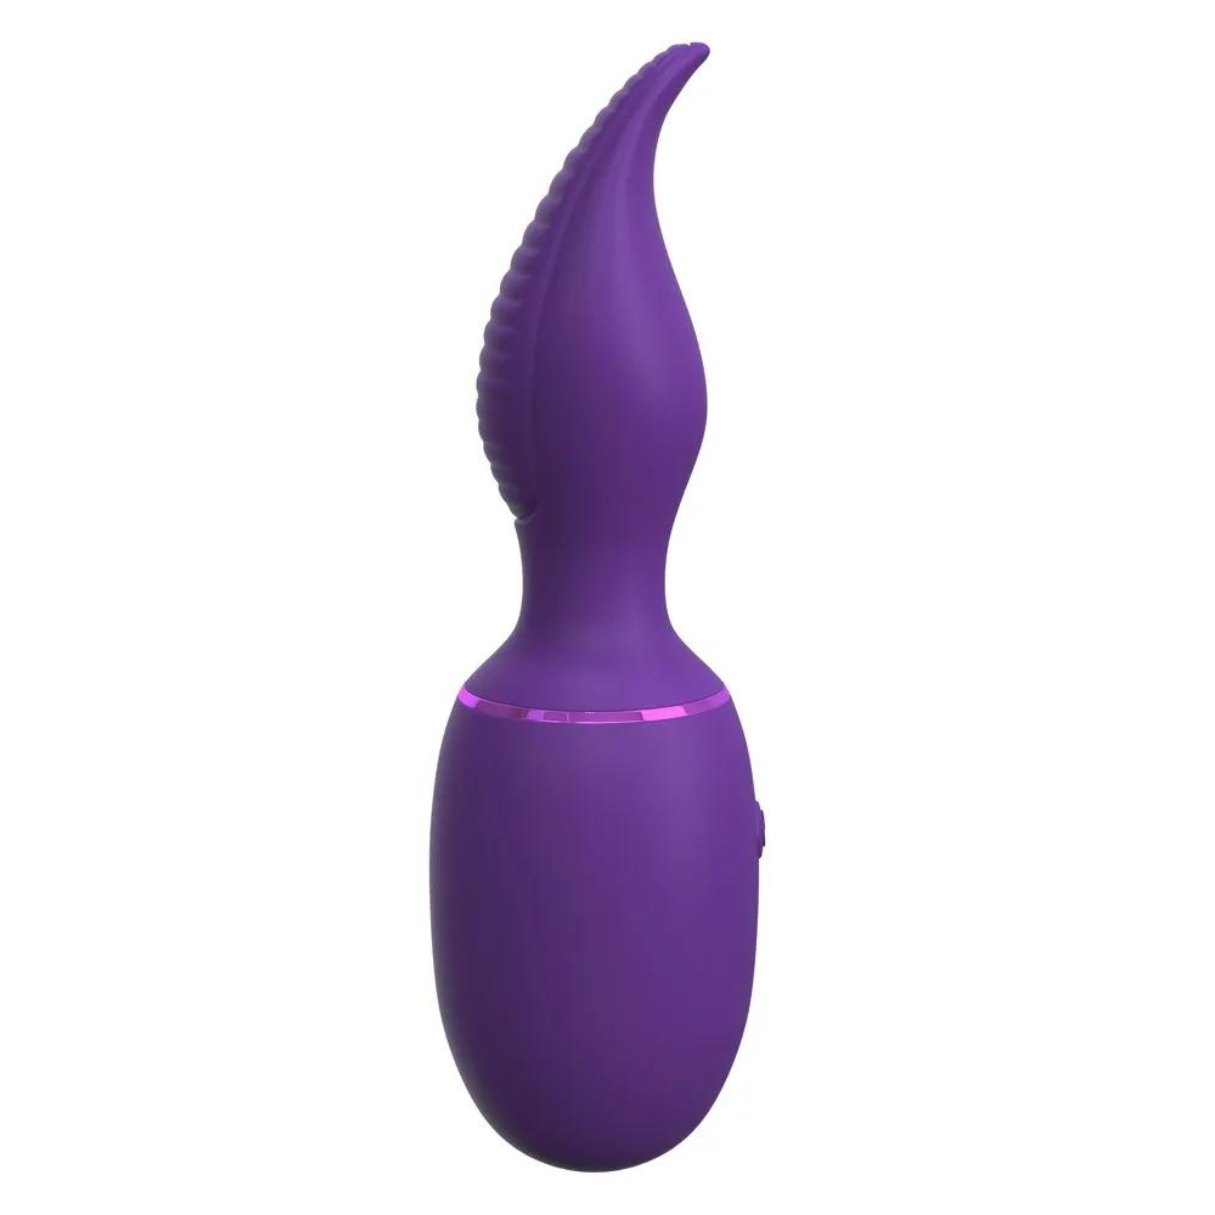 FANTASY FOR HER Her Vibrator Tongue-Gasm ultimate